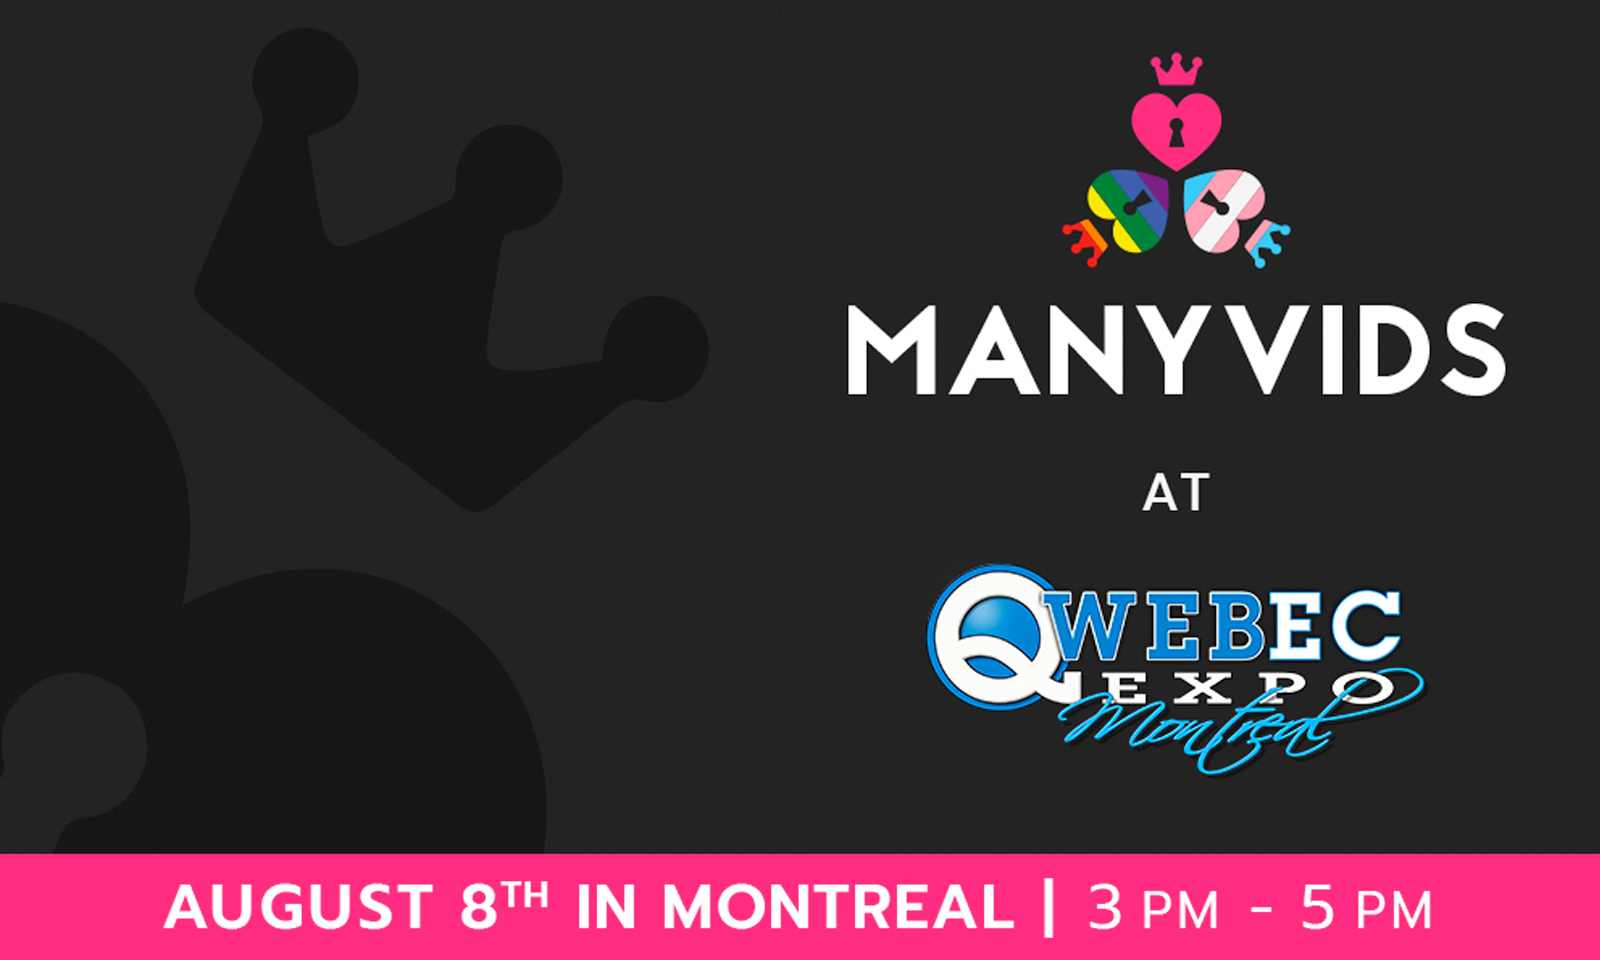 ManyVids Signs on as Sponsor of Qwebec Expo